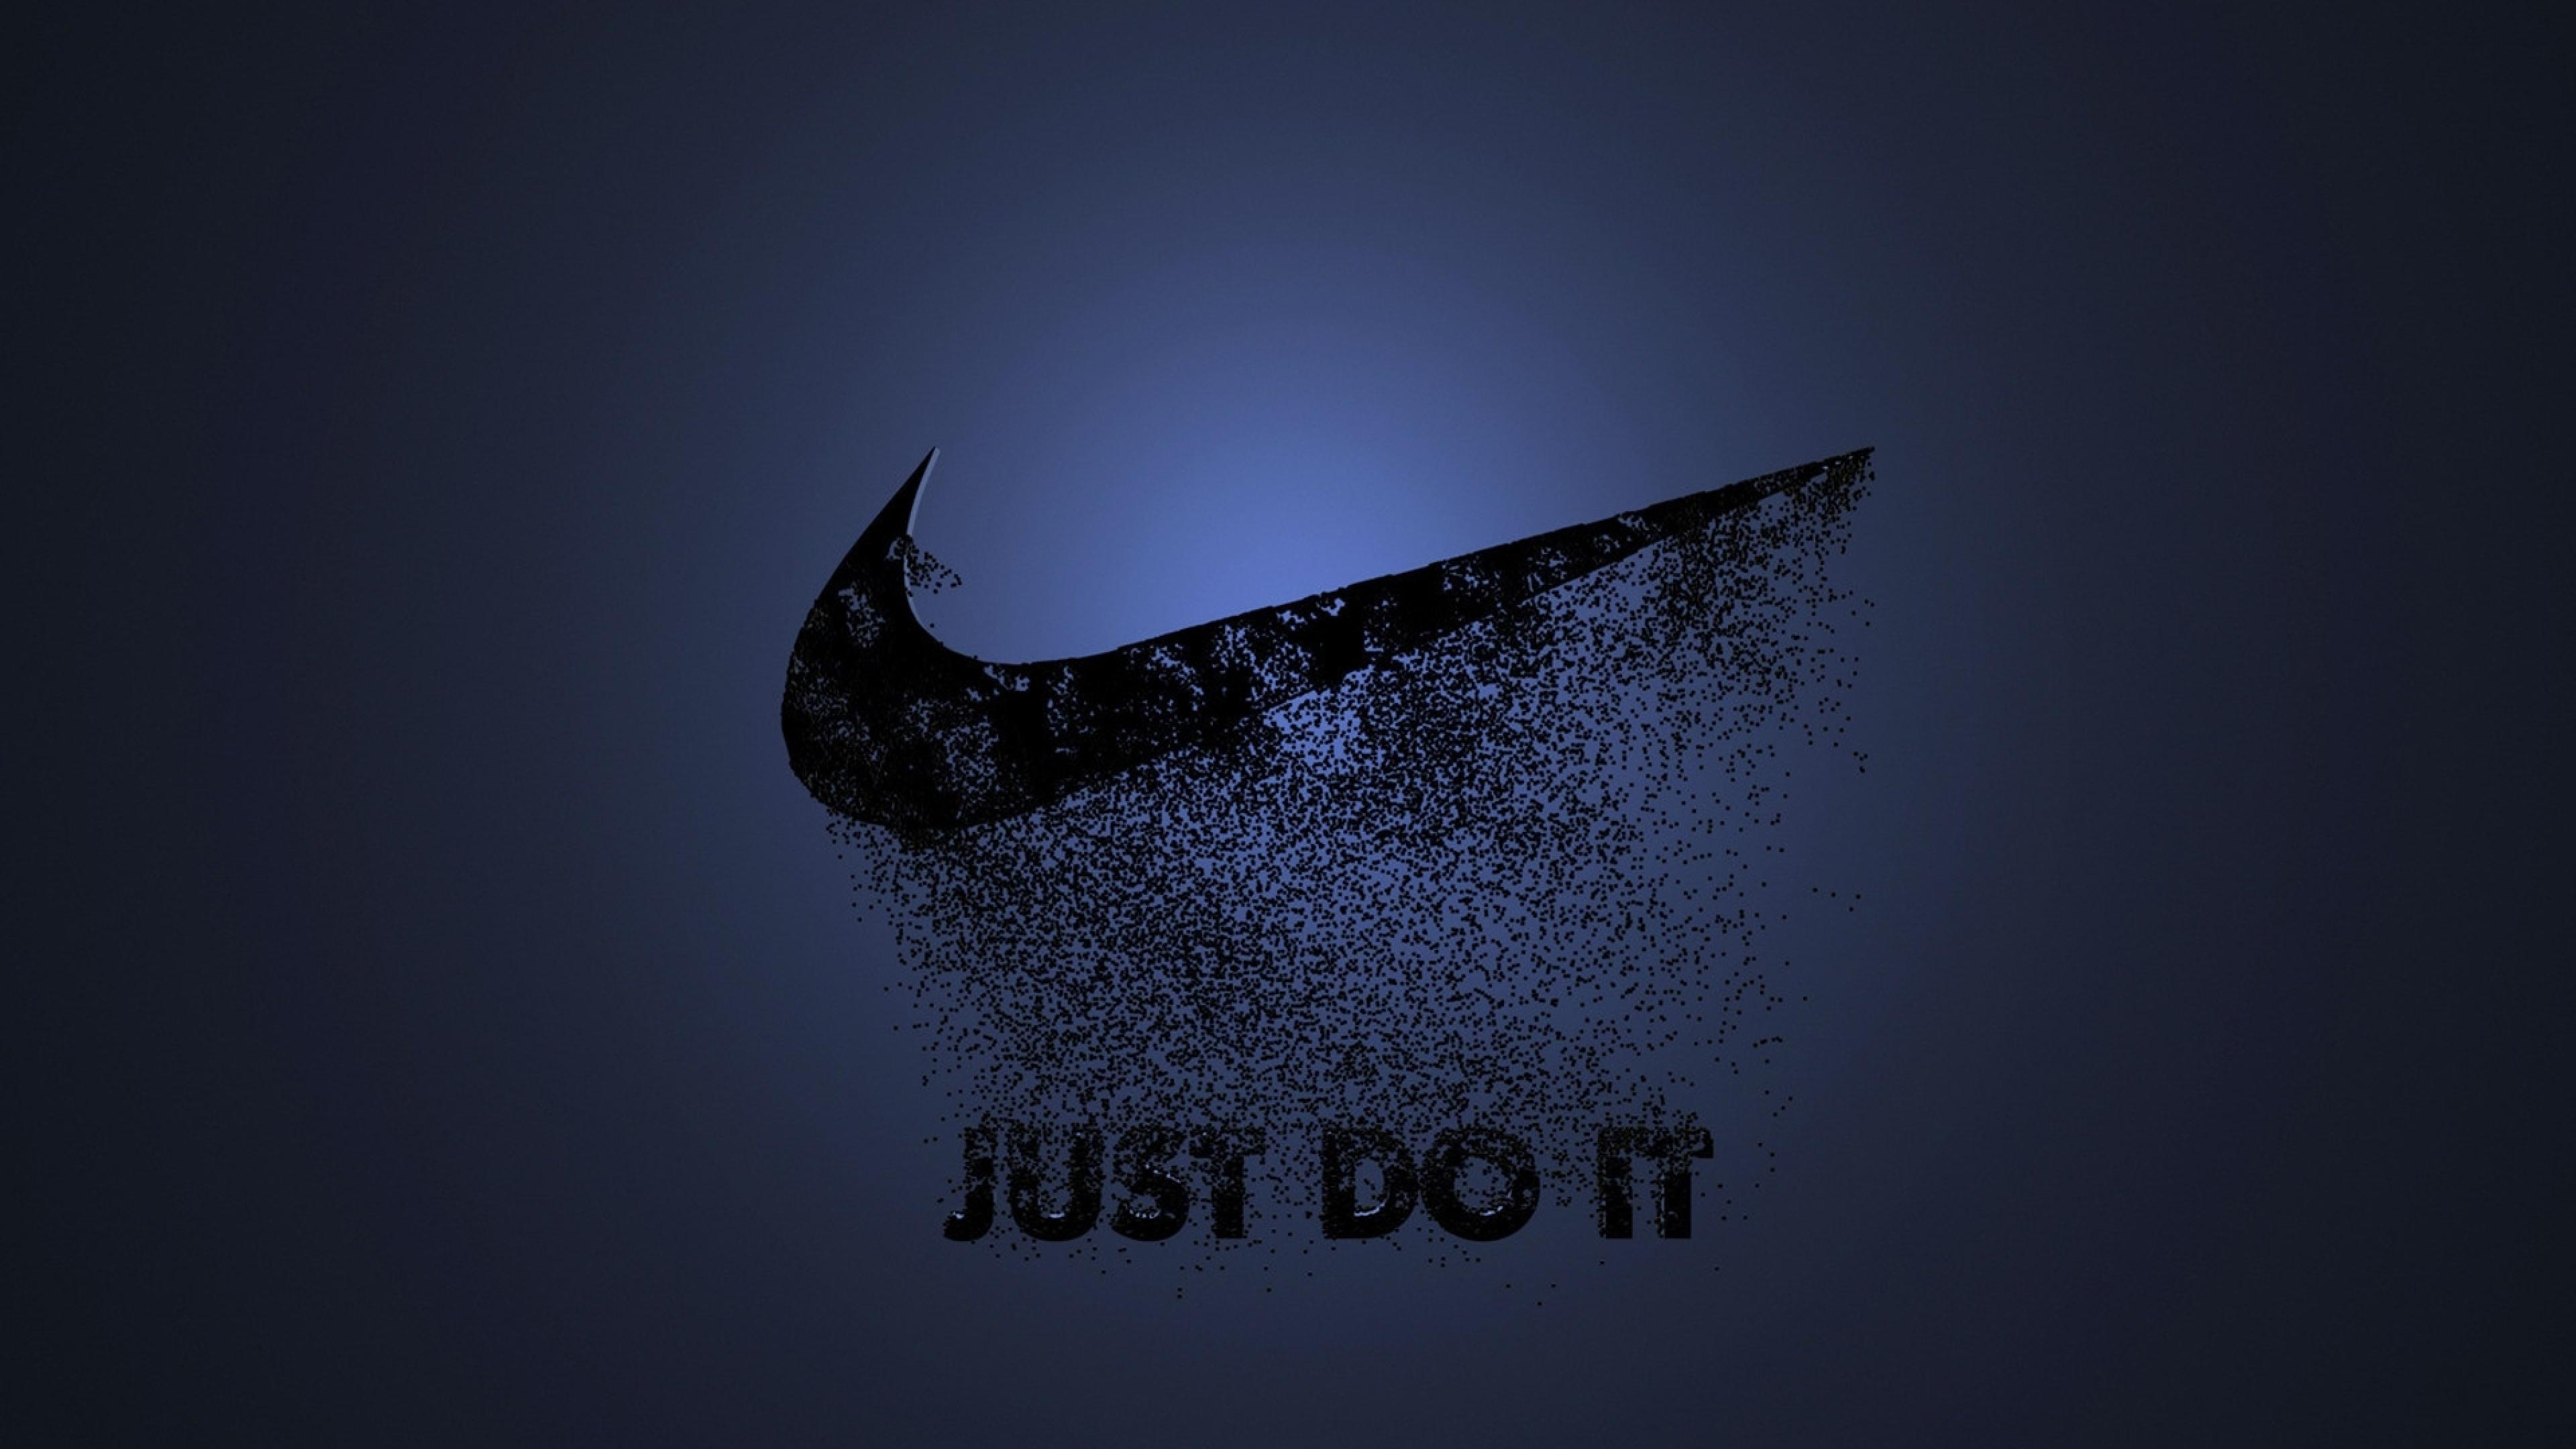 Awesome HDQ Nike Logo Picture (Awesome 48 HQFX Wallpaper)